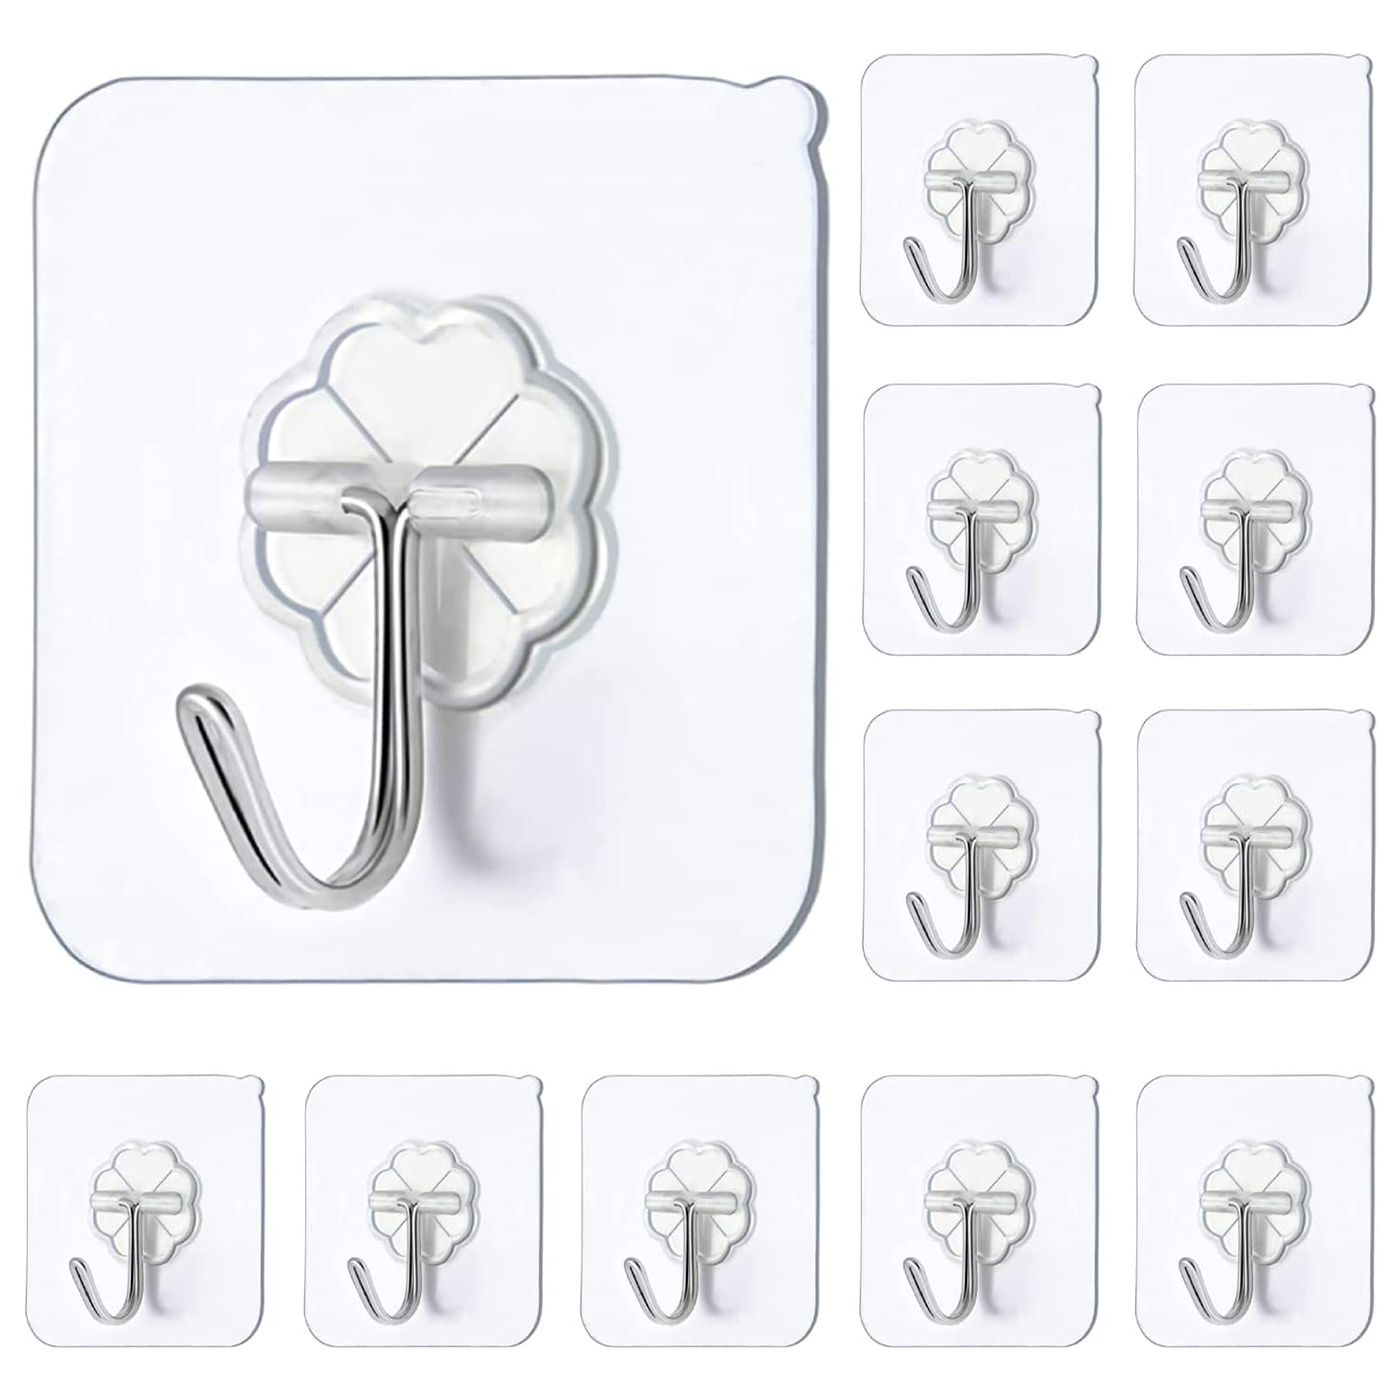 Large Adhesive Hooks for Hanging Heavy Duty Wall Hooks 22 lbs Self Adhesive  Towel Waterproof Transparent Hooks for Bag Shower Outdoor Kitchen Cup Hooks  Curtain Door Coat Hooks 18 Pack 